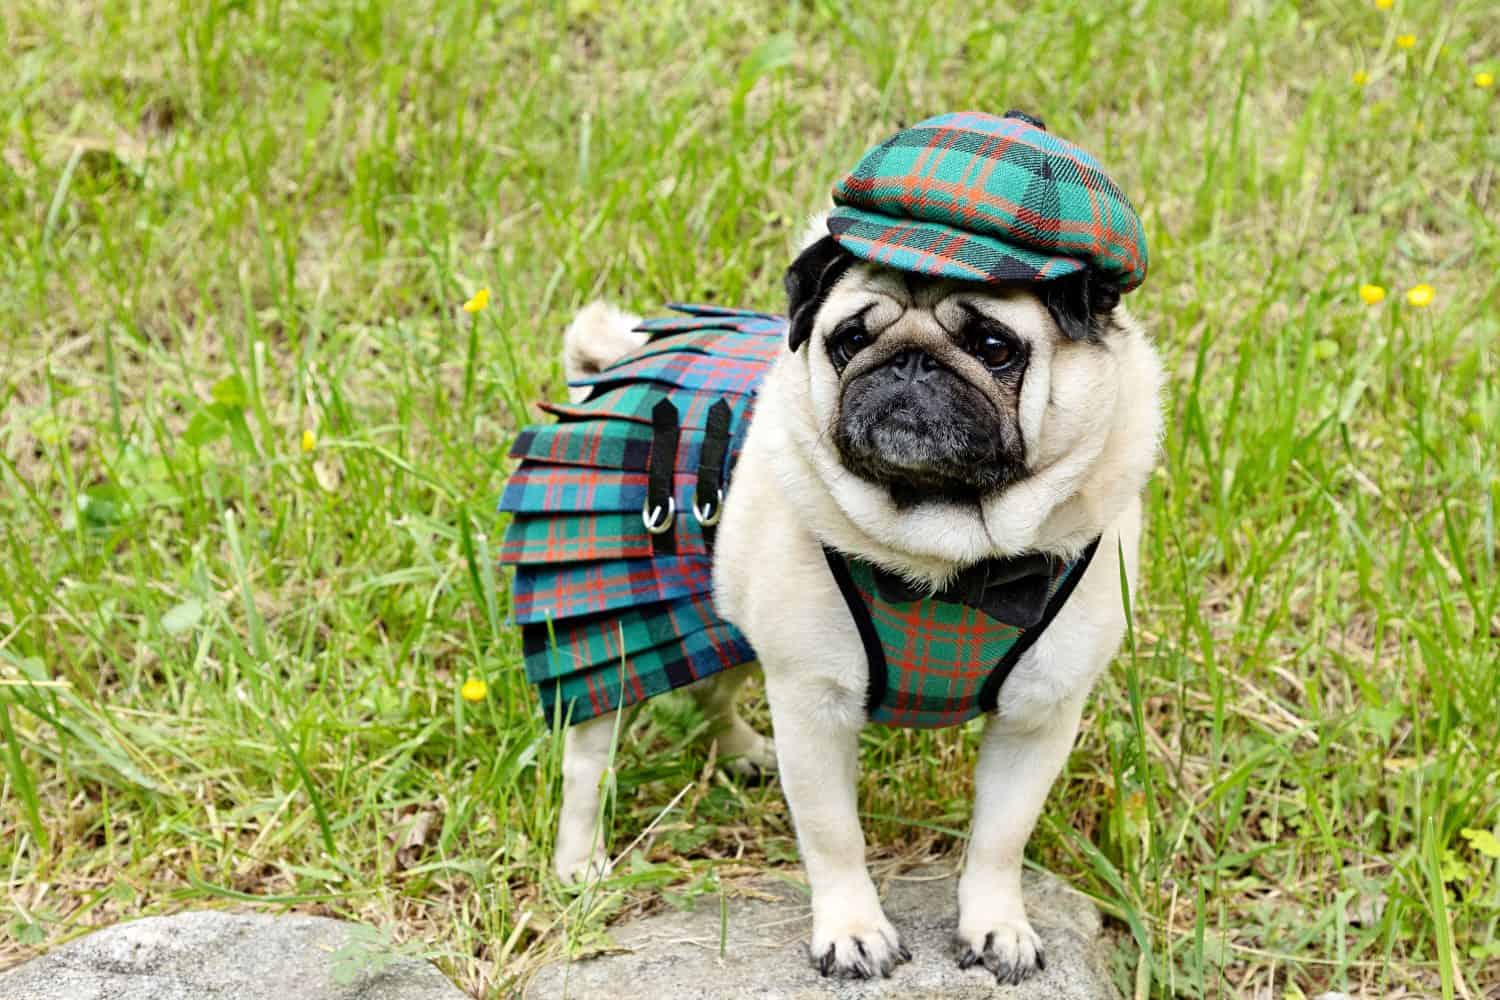 Pug dressed in Scottish tartan hat, harness and kilt perched on rock with grassy hill in background